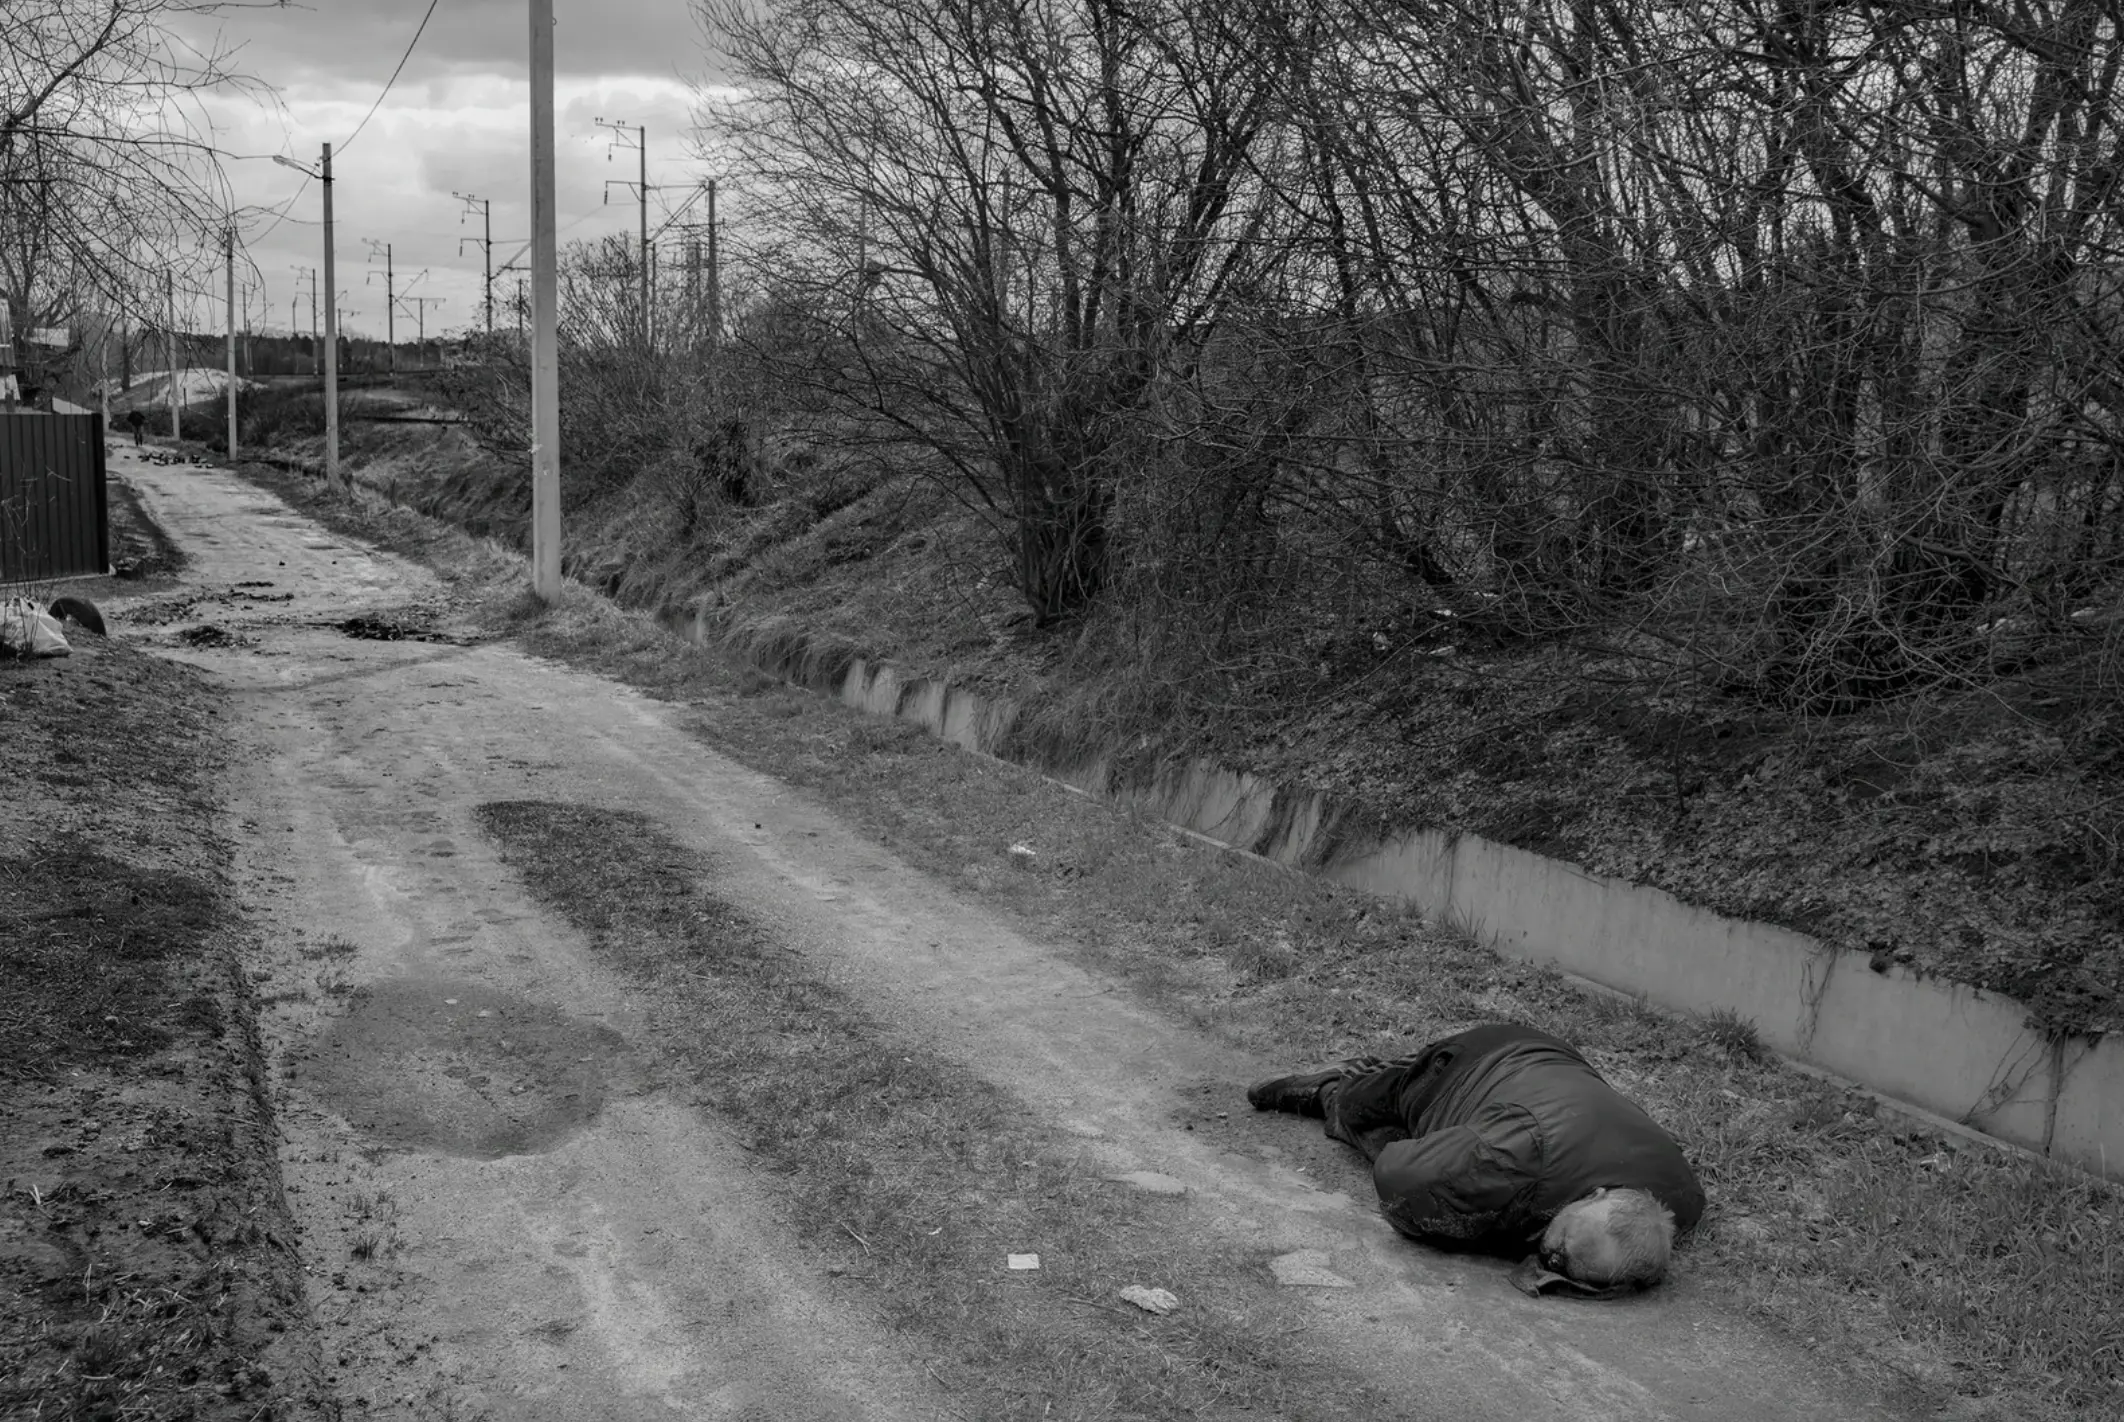 The corpse of a man in civilian clothes lies in a road.